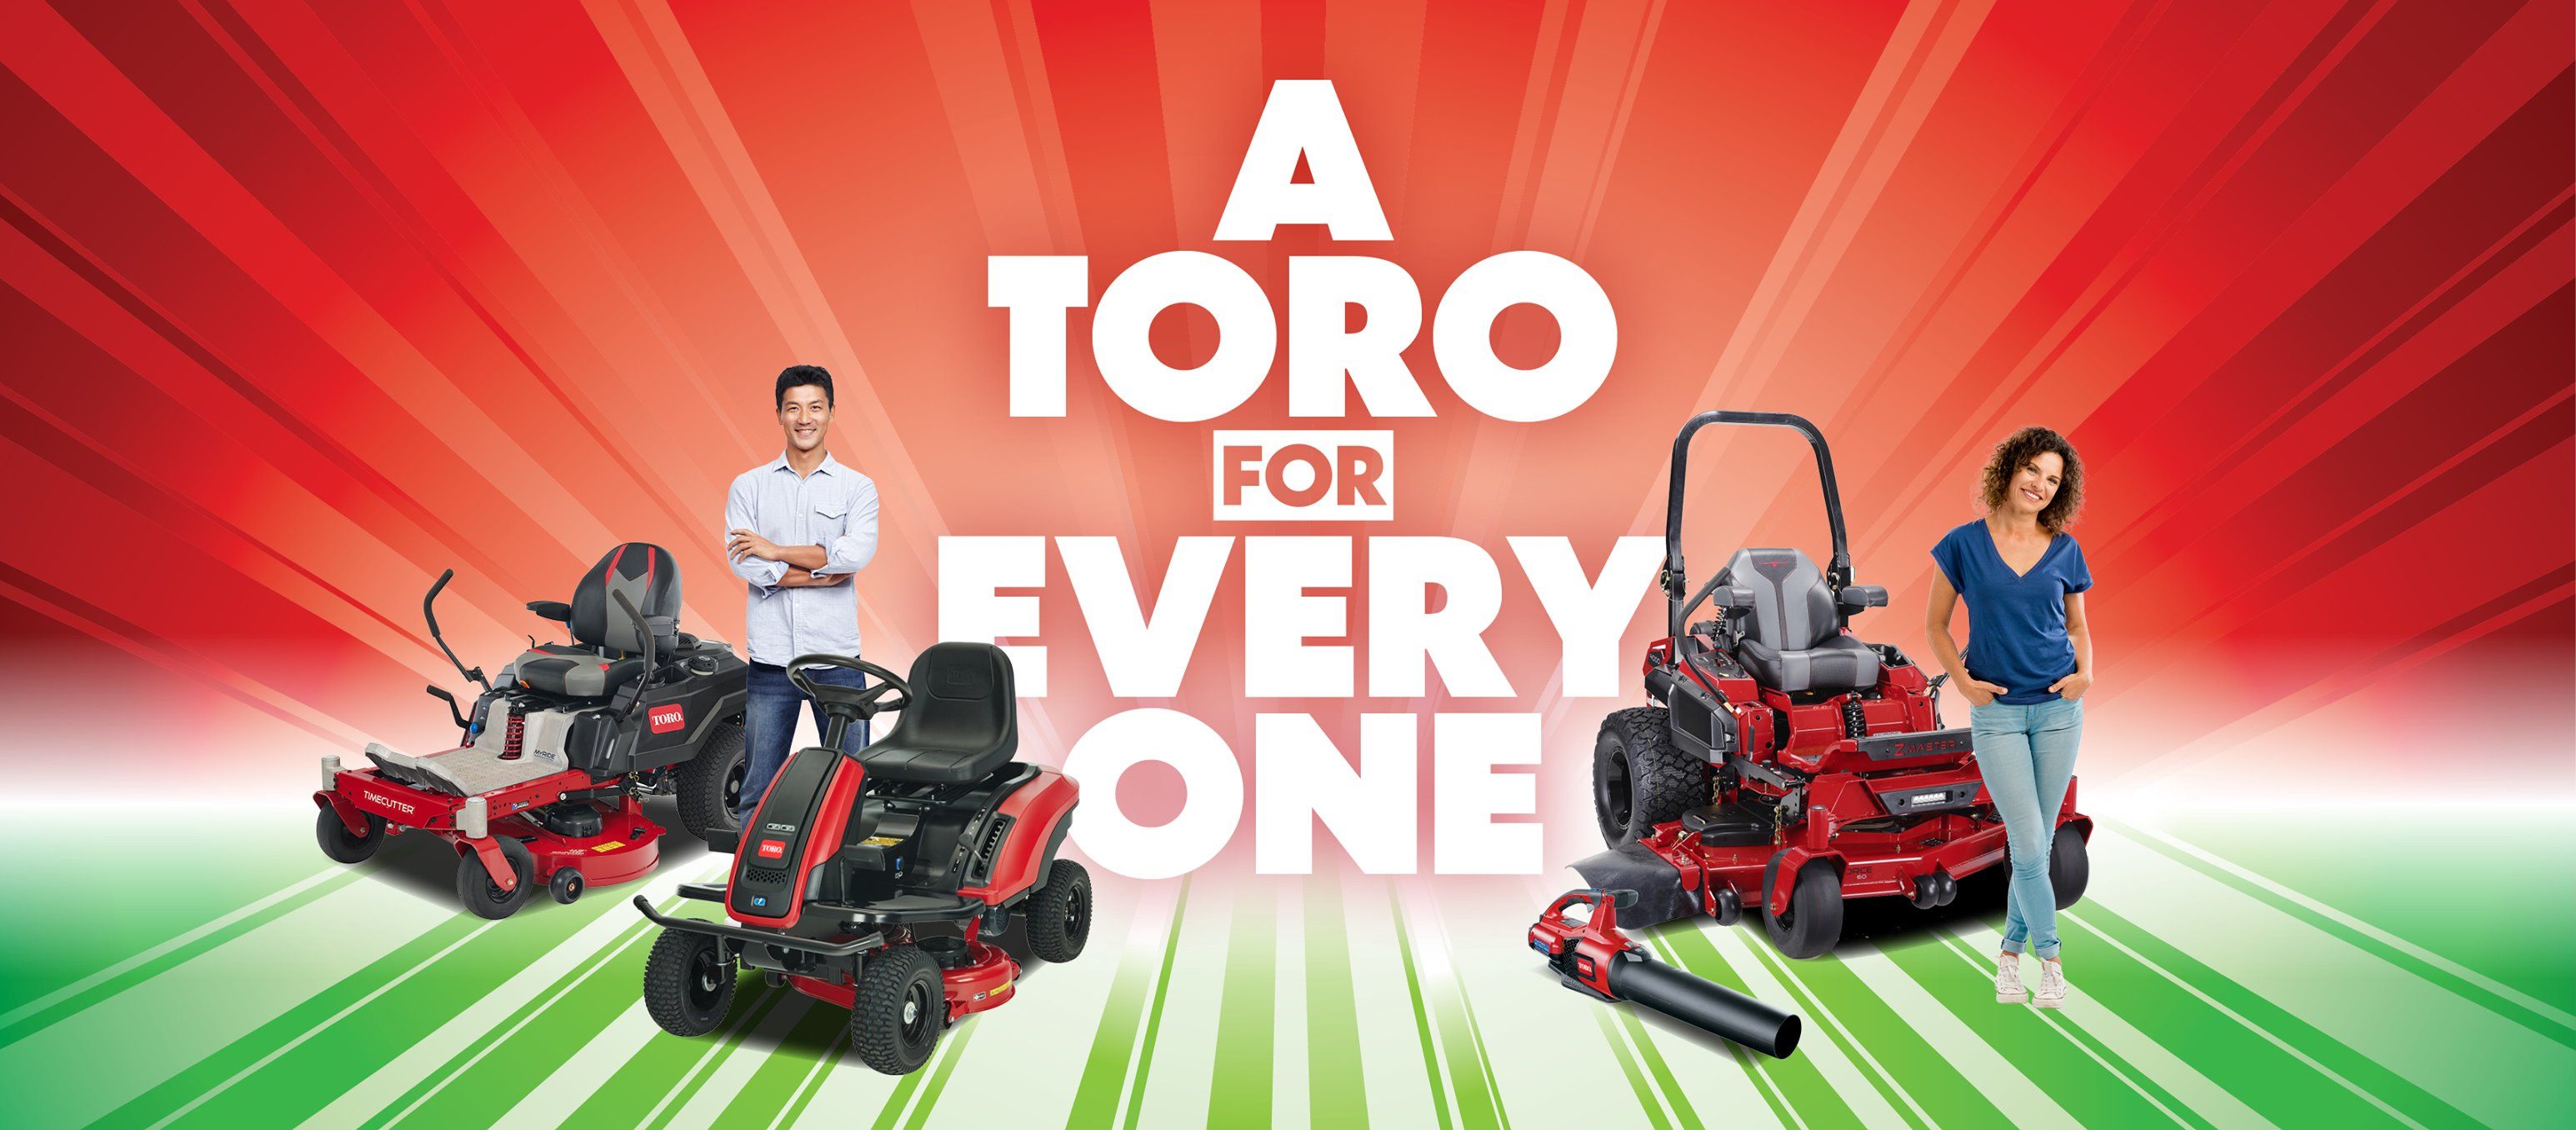 A Toro For Every One